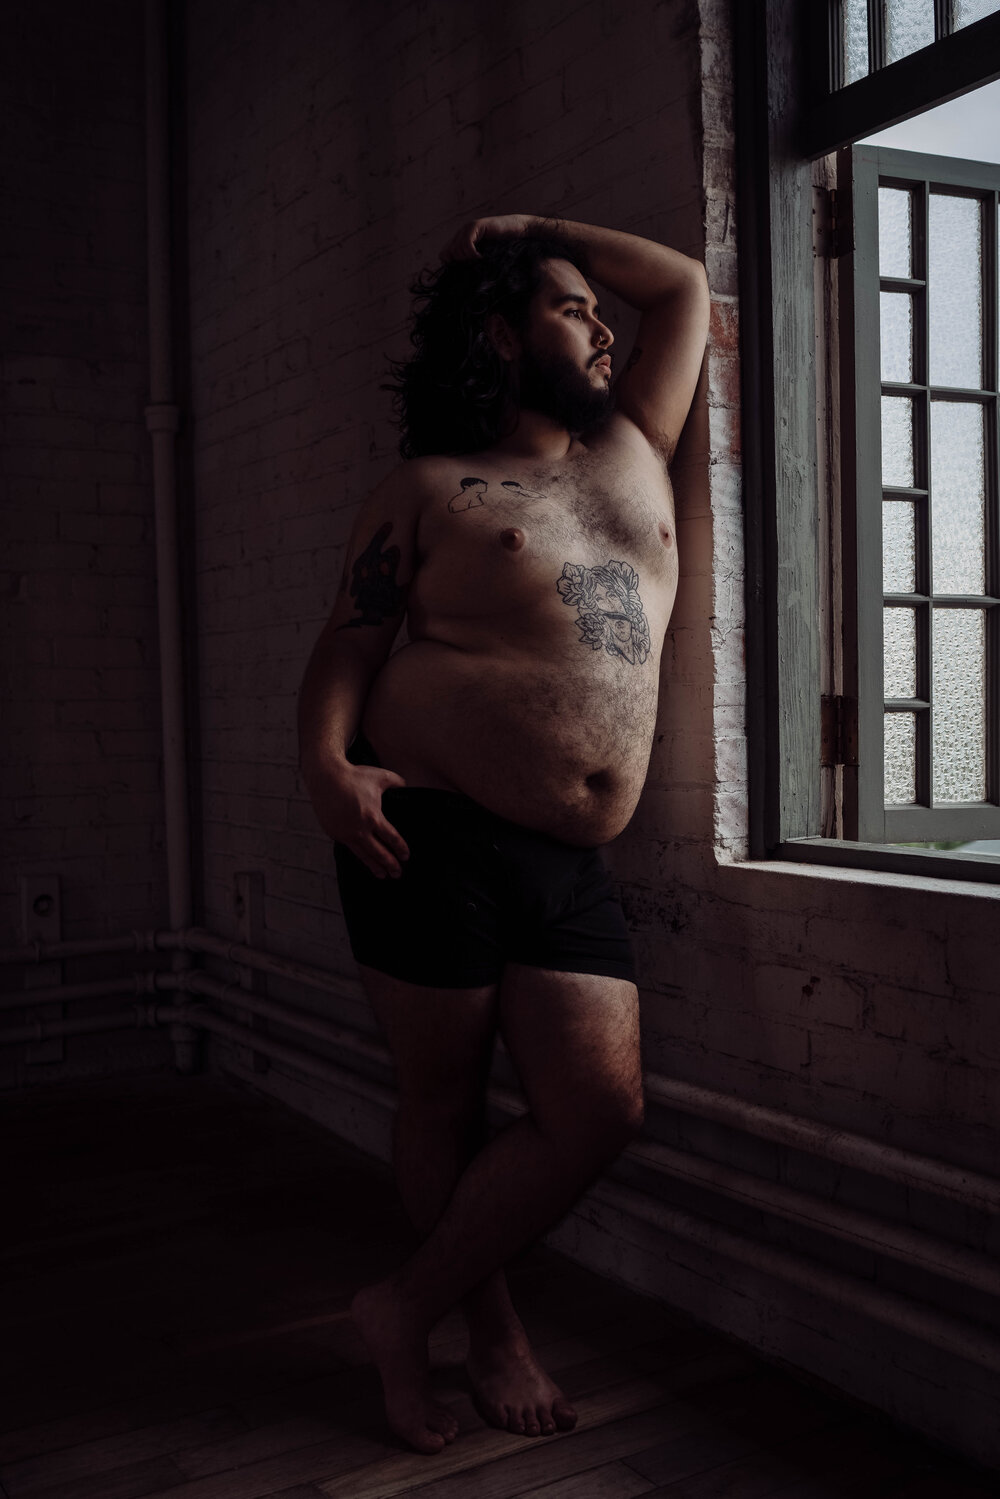 Oklahoma City Male Boudoir bearded shirtless man with tattoos leaning against brick wall looking out the window